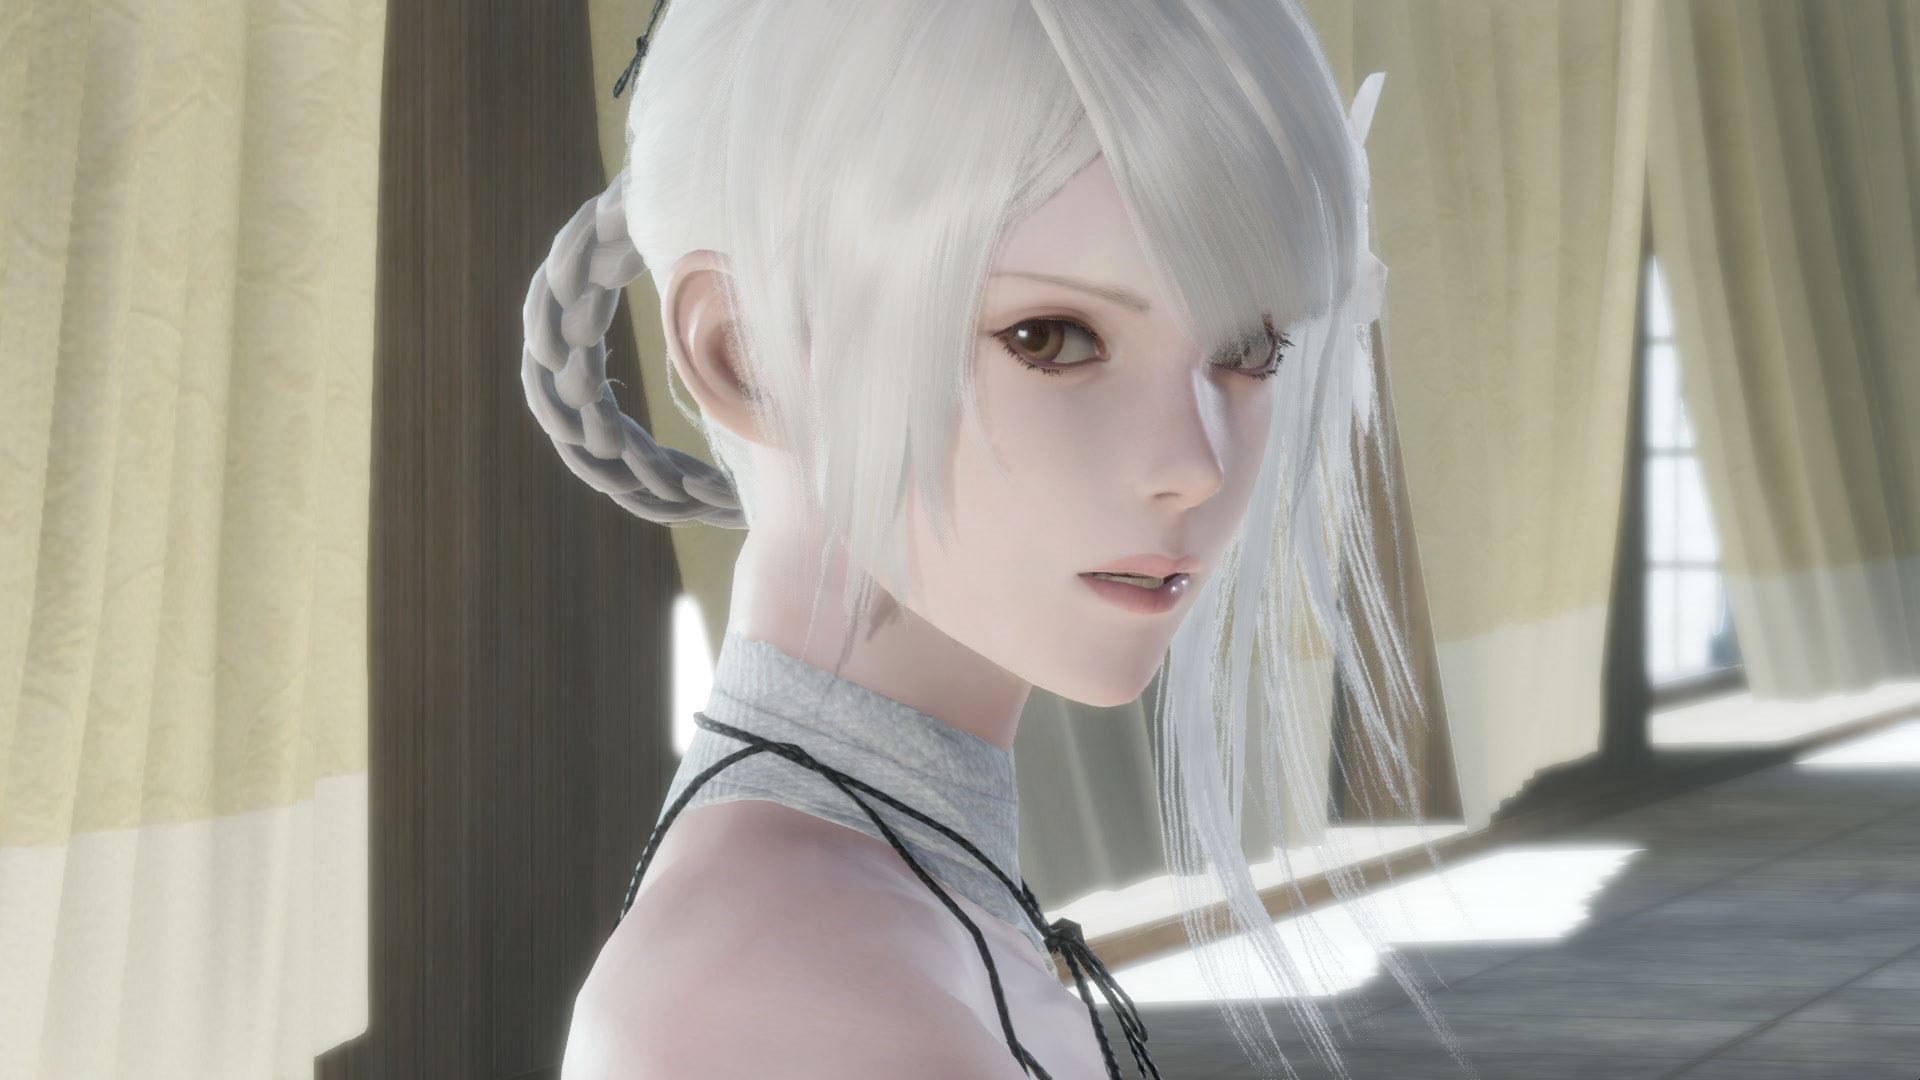 Kaine, so far, is my favourite character. Somebody tell her high-waisted panties are back en vogue so she can keep sand out of her butt. (Screenshot: Square Enix)